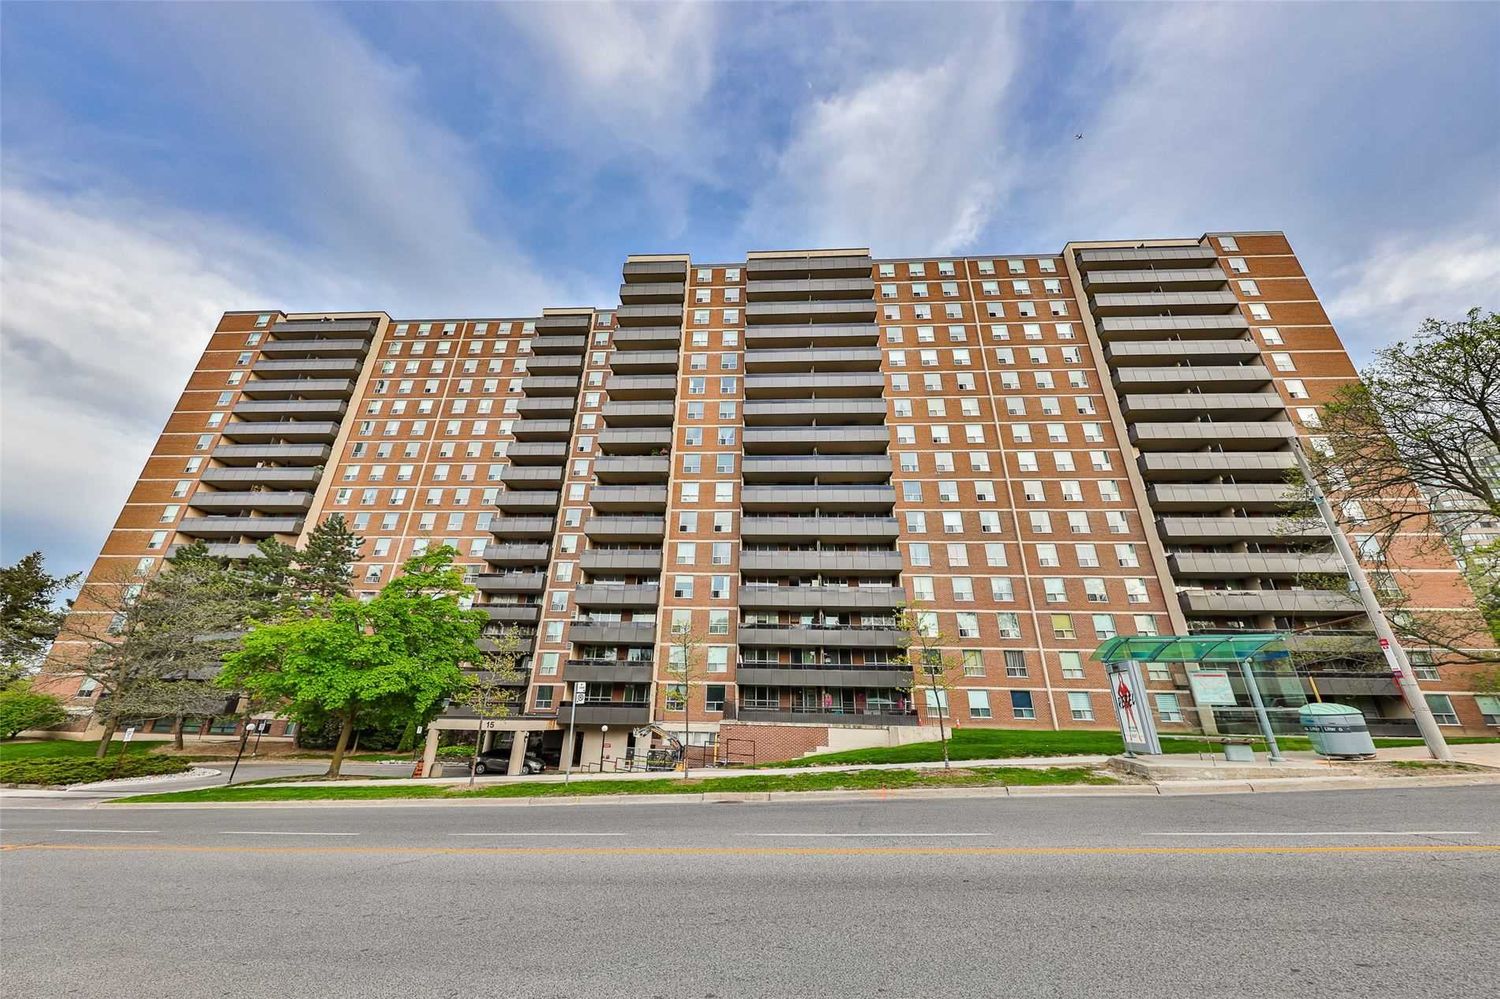 15 La Rose Avenue. Humber Hill Towers Condos is located in  Etobicoke, Toronto - image #1 of 2